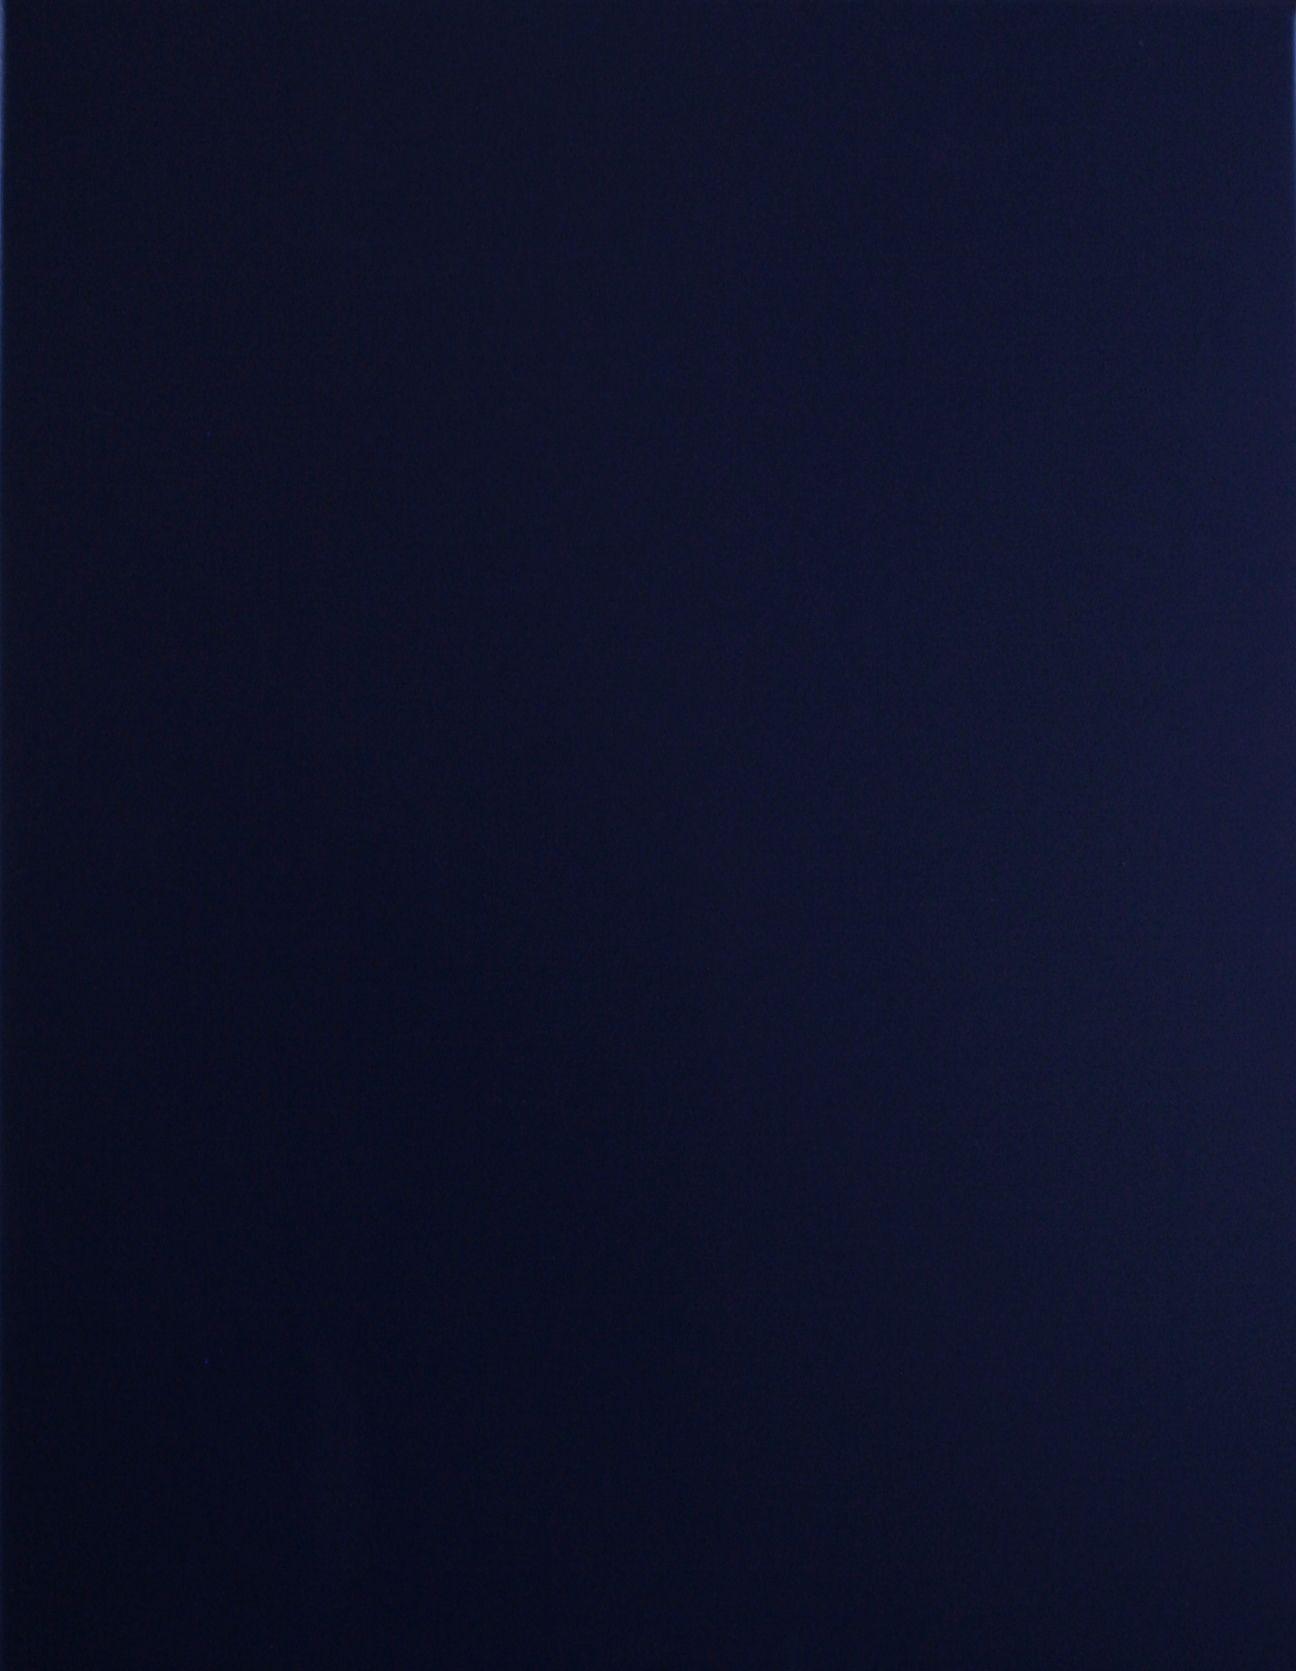 Solid Dark Blue Wallpapers - Top Free Solid Dark Blue Backgrounds